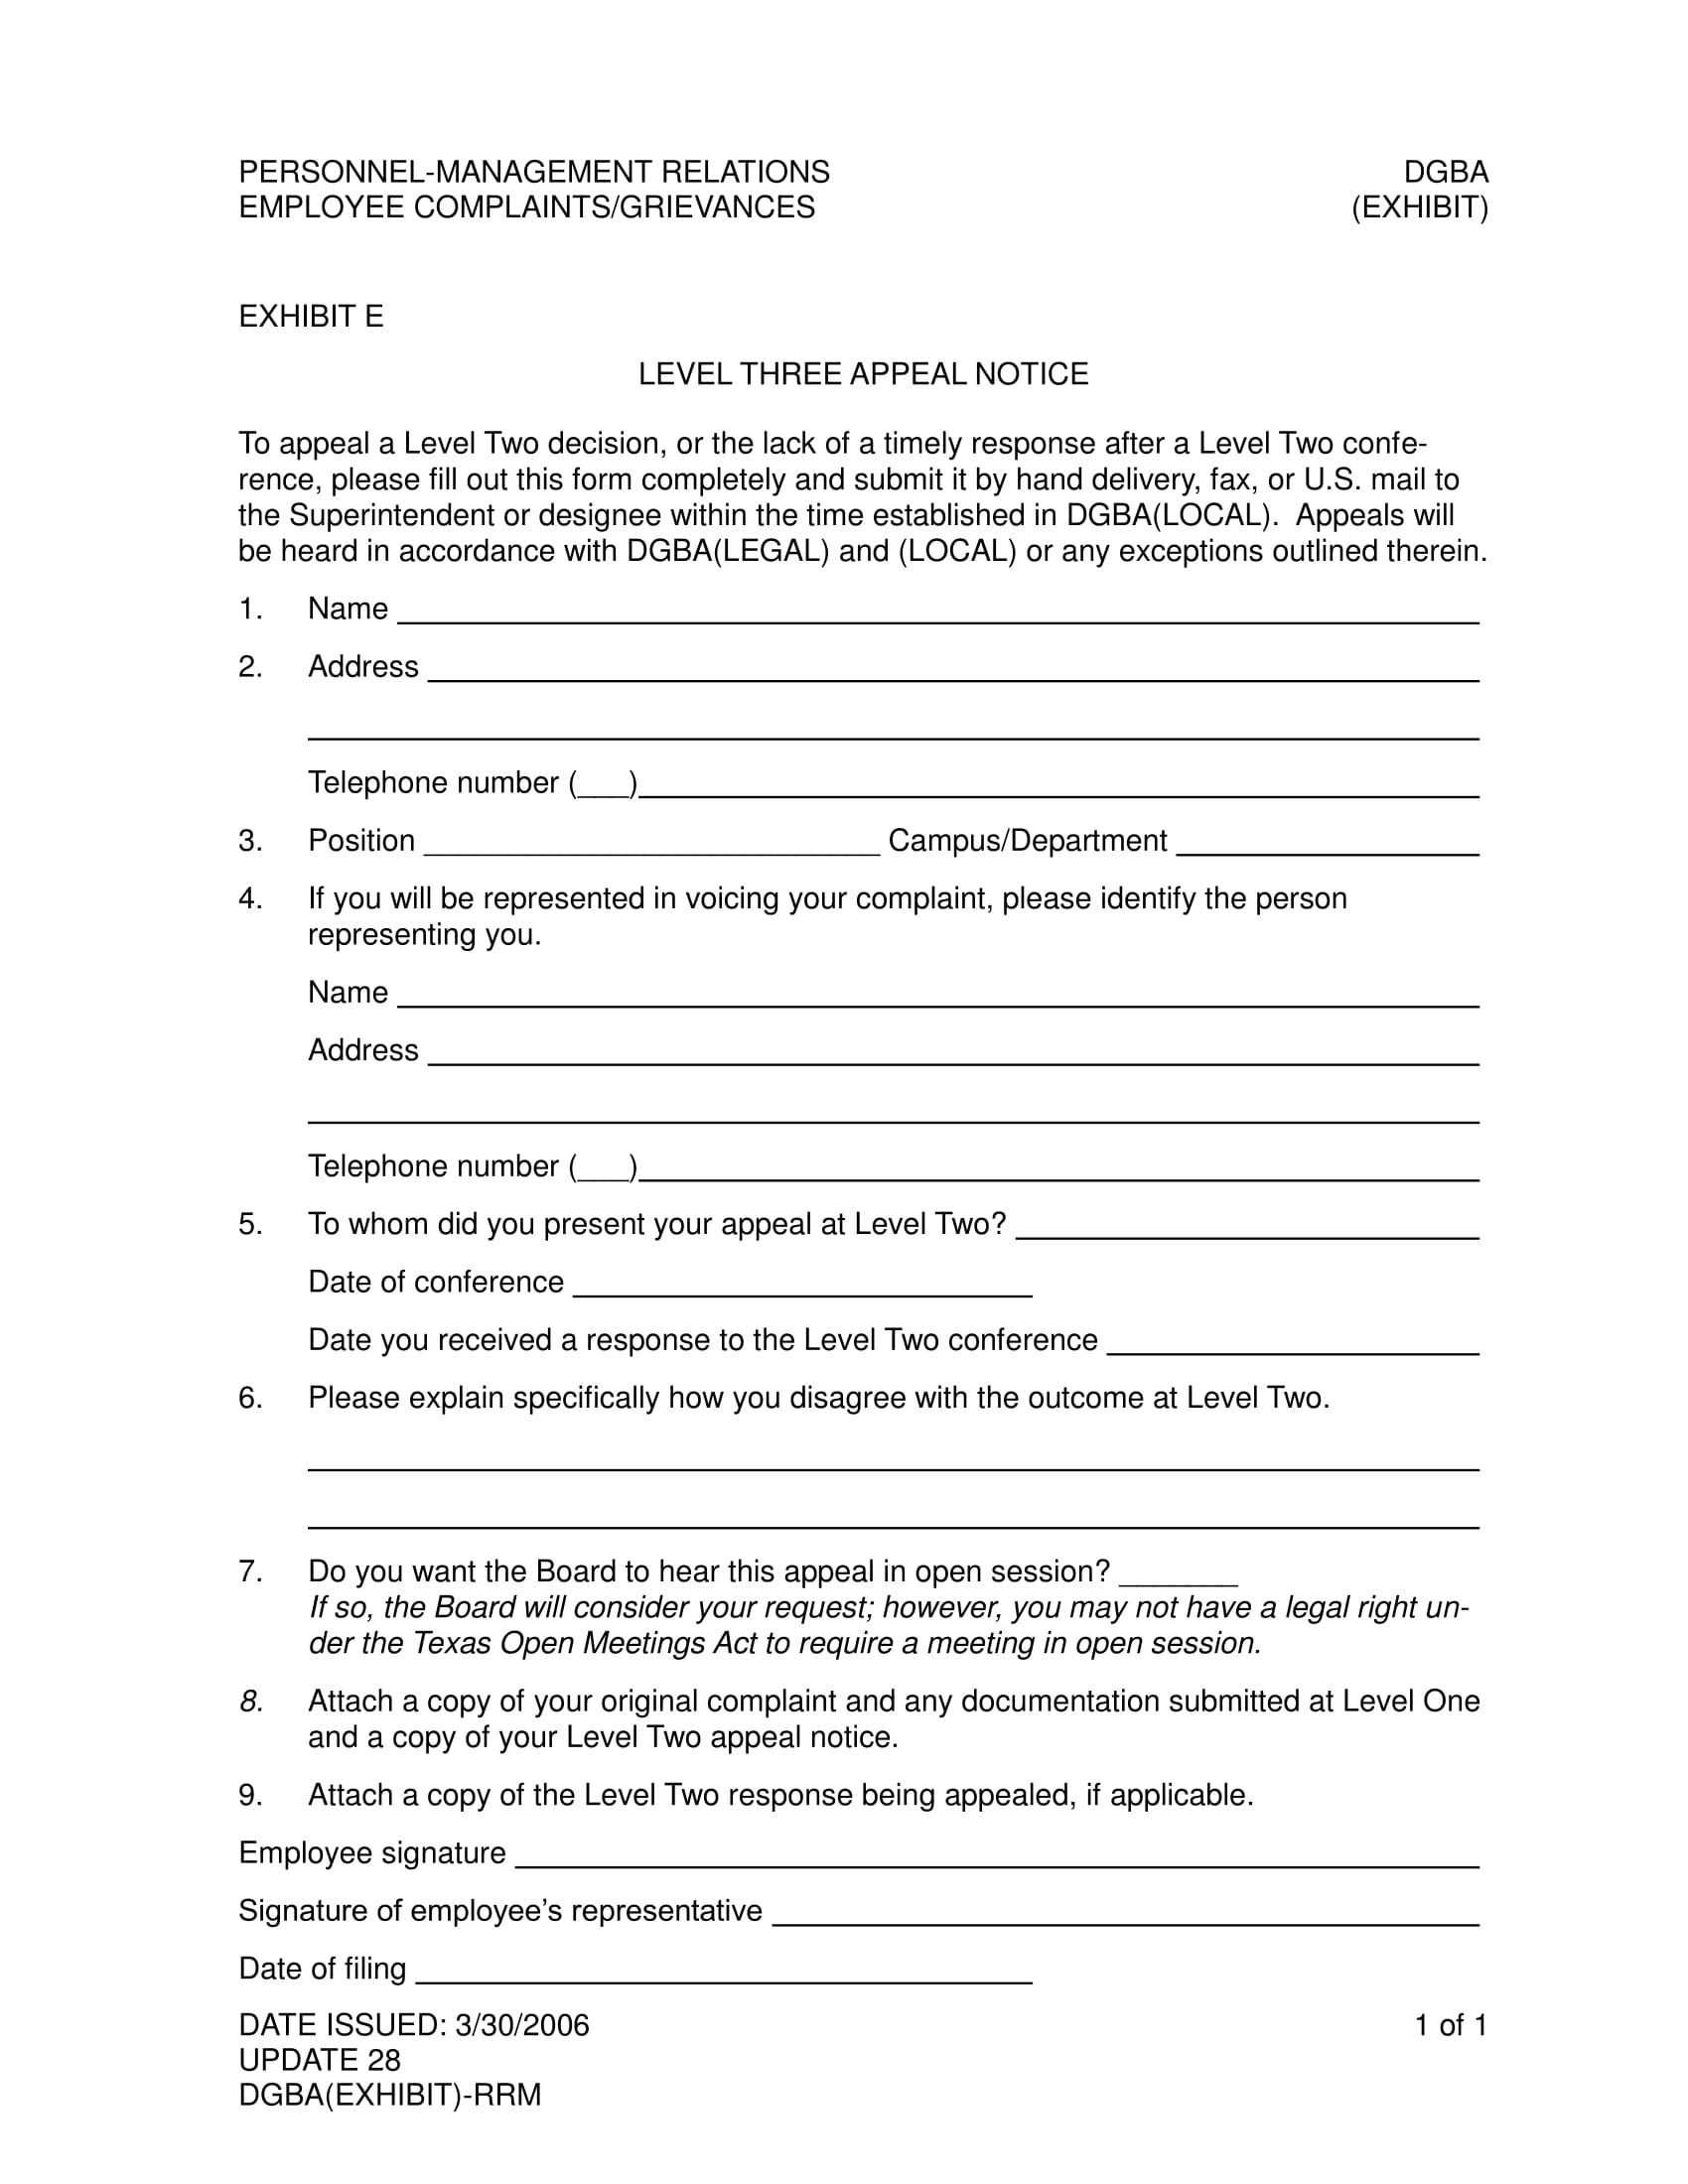 employee complaint appeal notice form 11